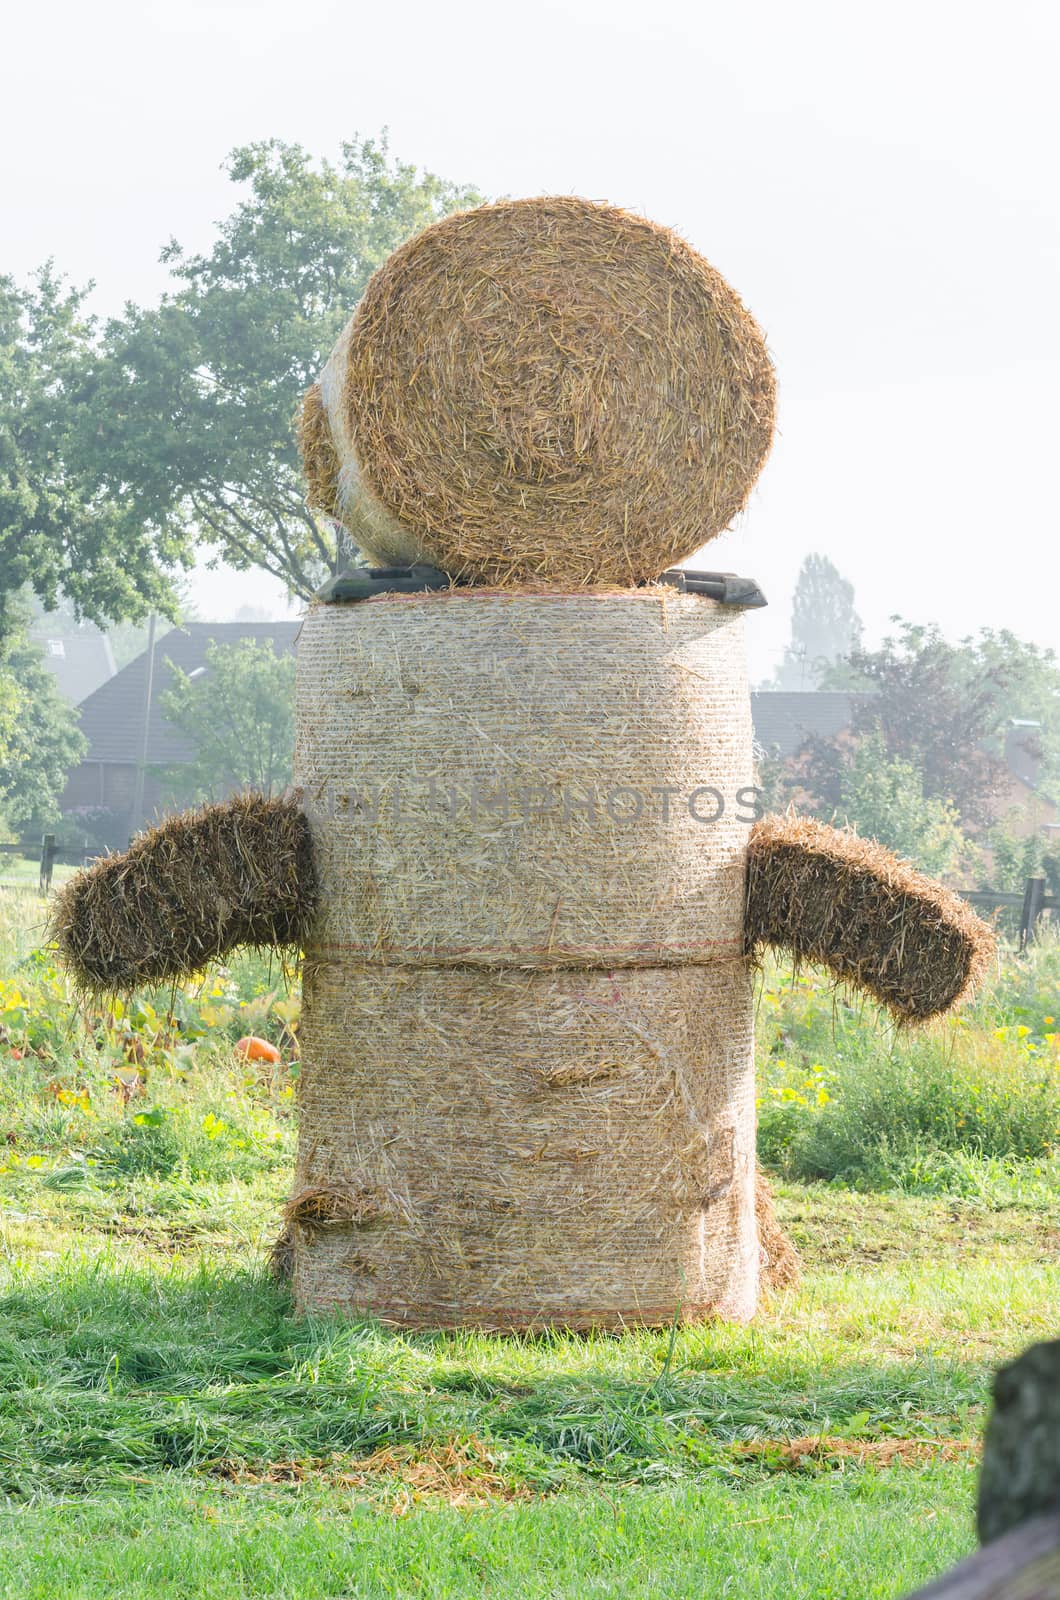 Hay bale figure, in the countryside.    by JFsPic